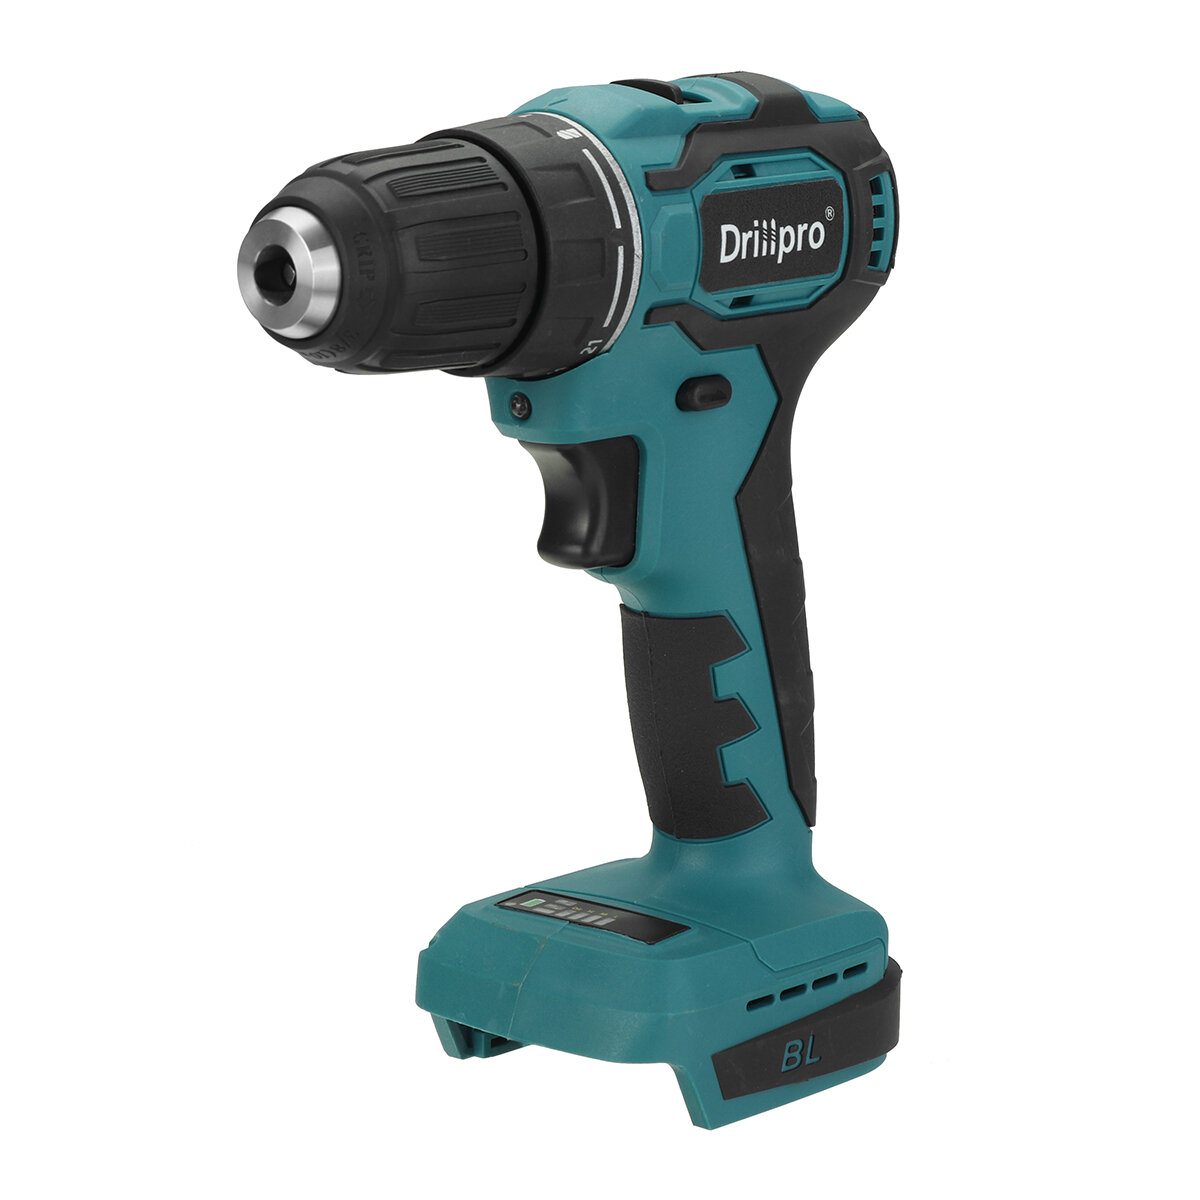 Drillpro 10mm/13mm Cordless Brushless Drill Driver Rechargable Electric Screwdriver Driver Fit Makit